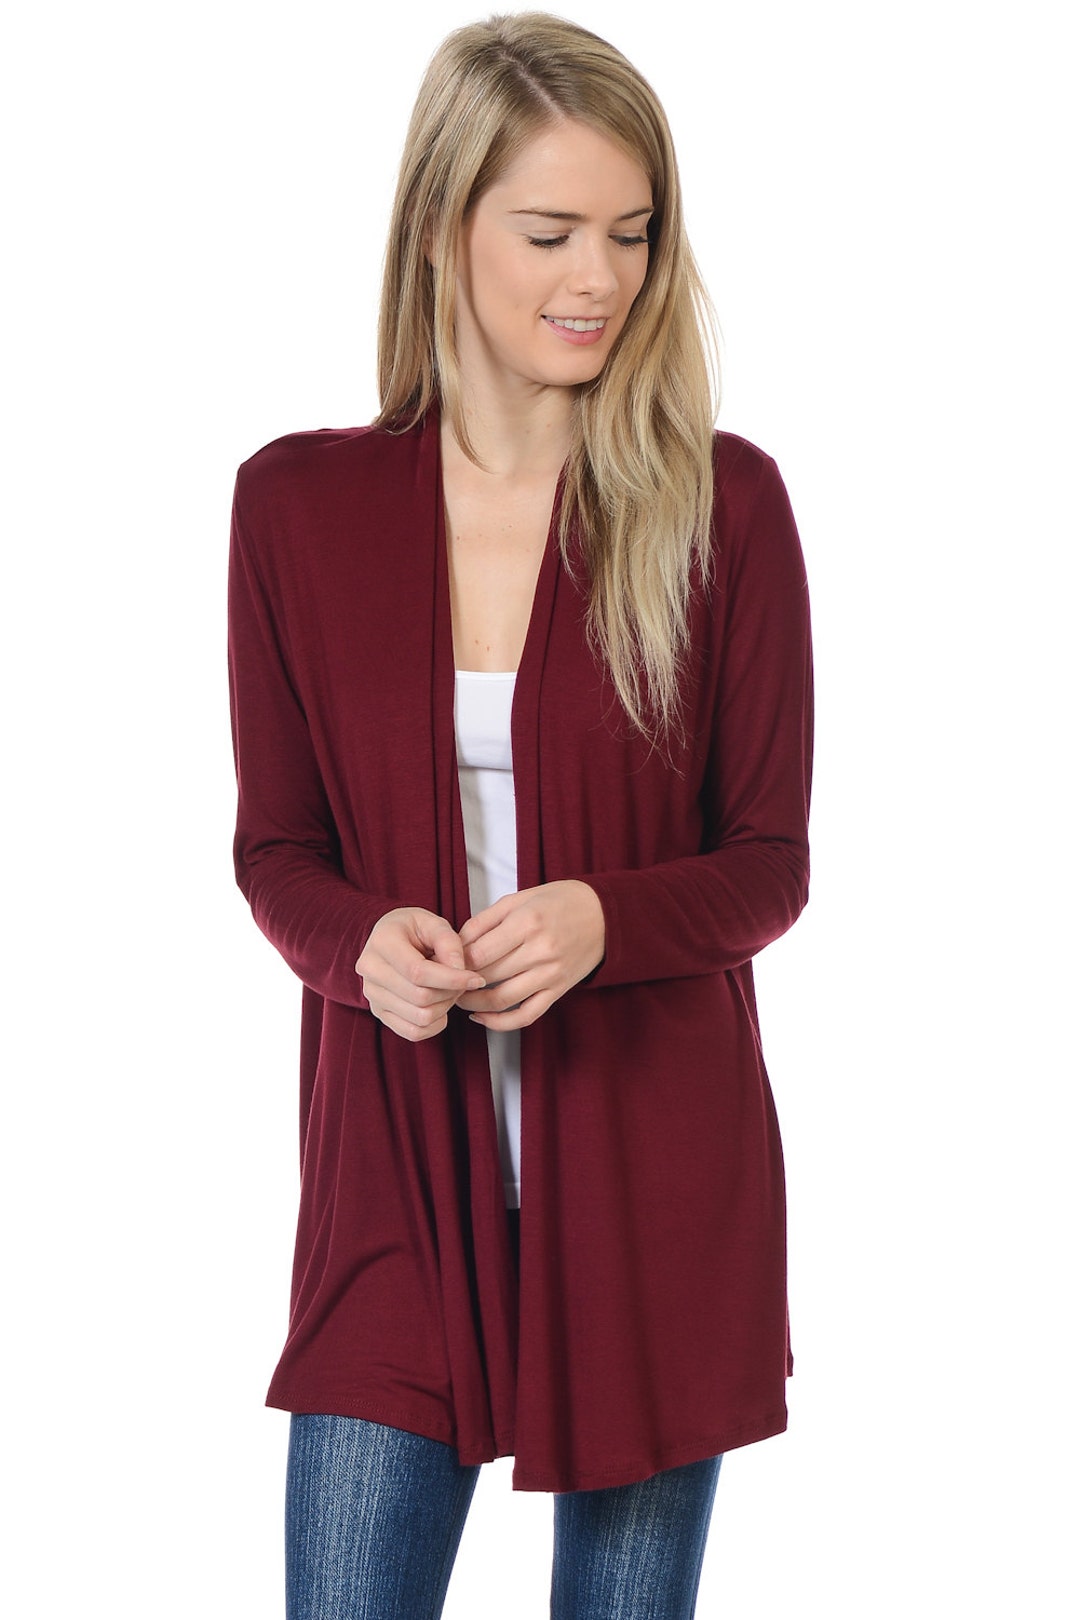 Solid Rayon Spandex Long Sleeve Jersey Cardigan Sweater Burgundy - Etsy